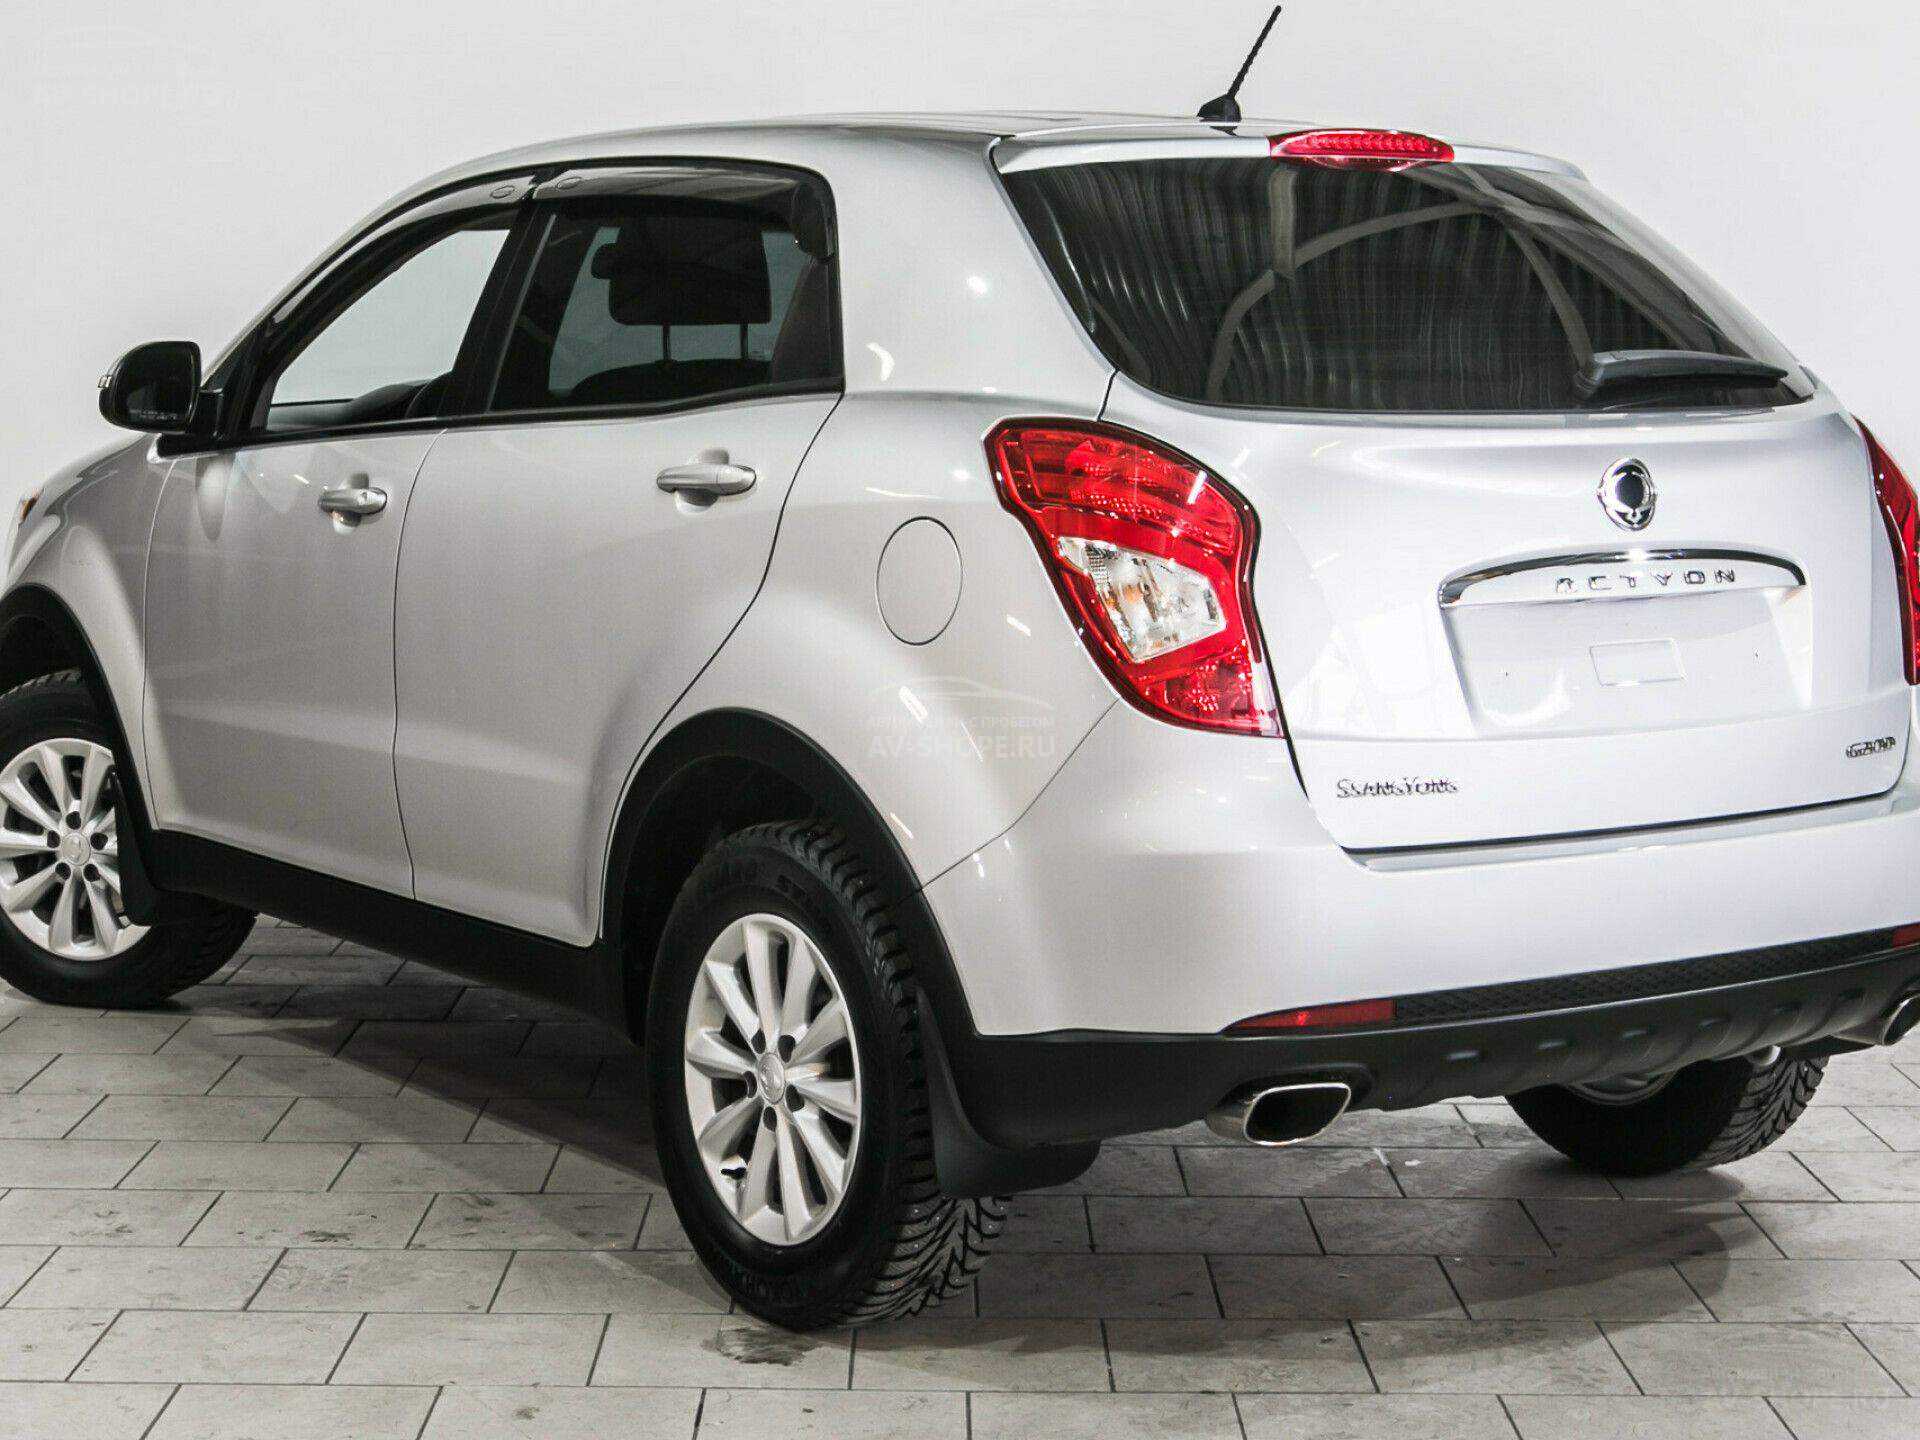 SSANGYONG Actyon 2014. ССАНГЙОНГ Актион 2014. SSANGYONG Actyon 2.0 MT 2wd Welcome. Санг енг 2014 года. Актион 2014 г